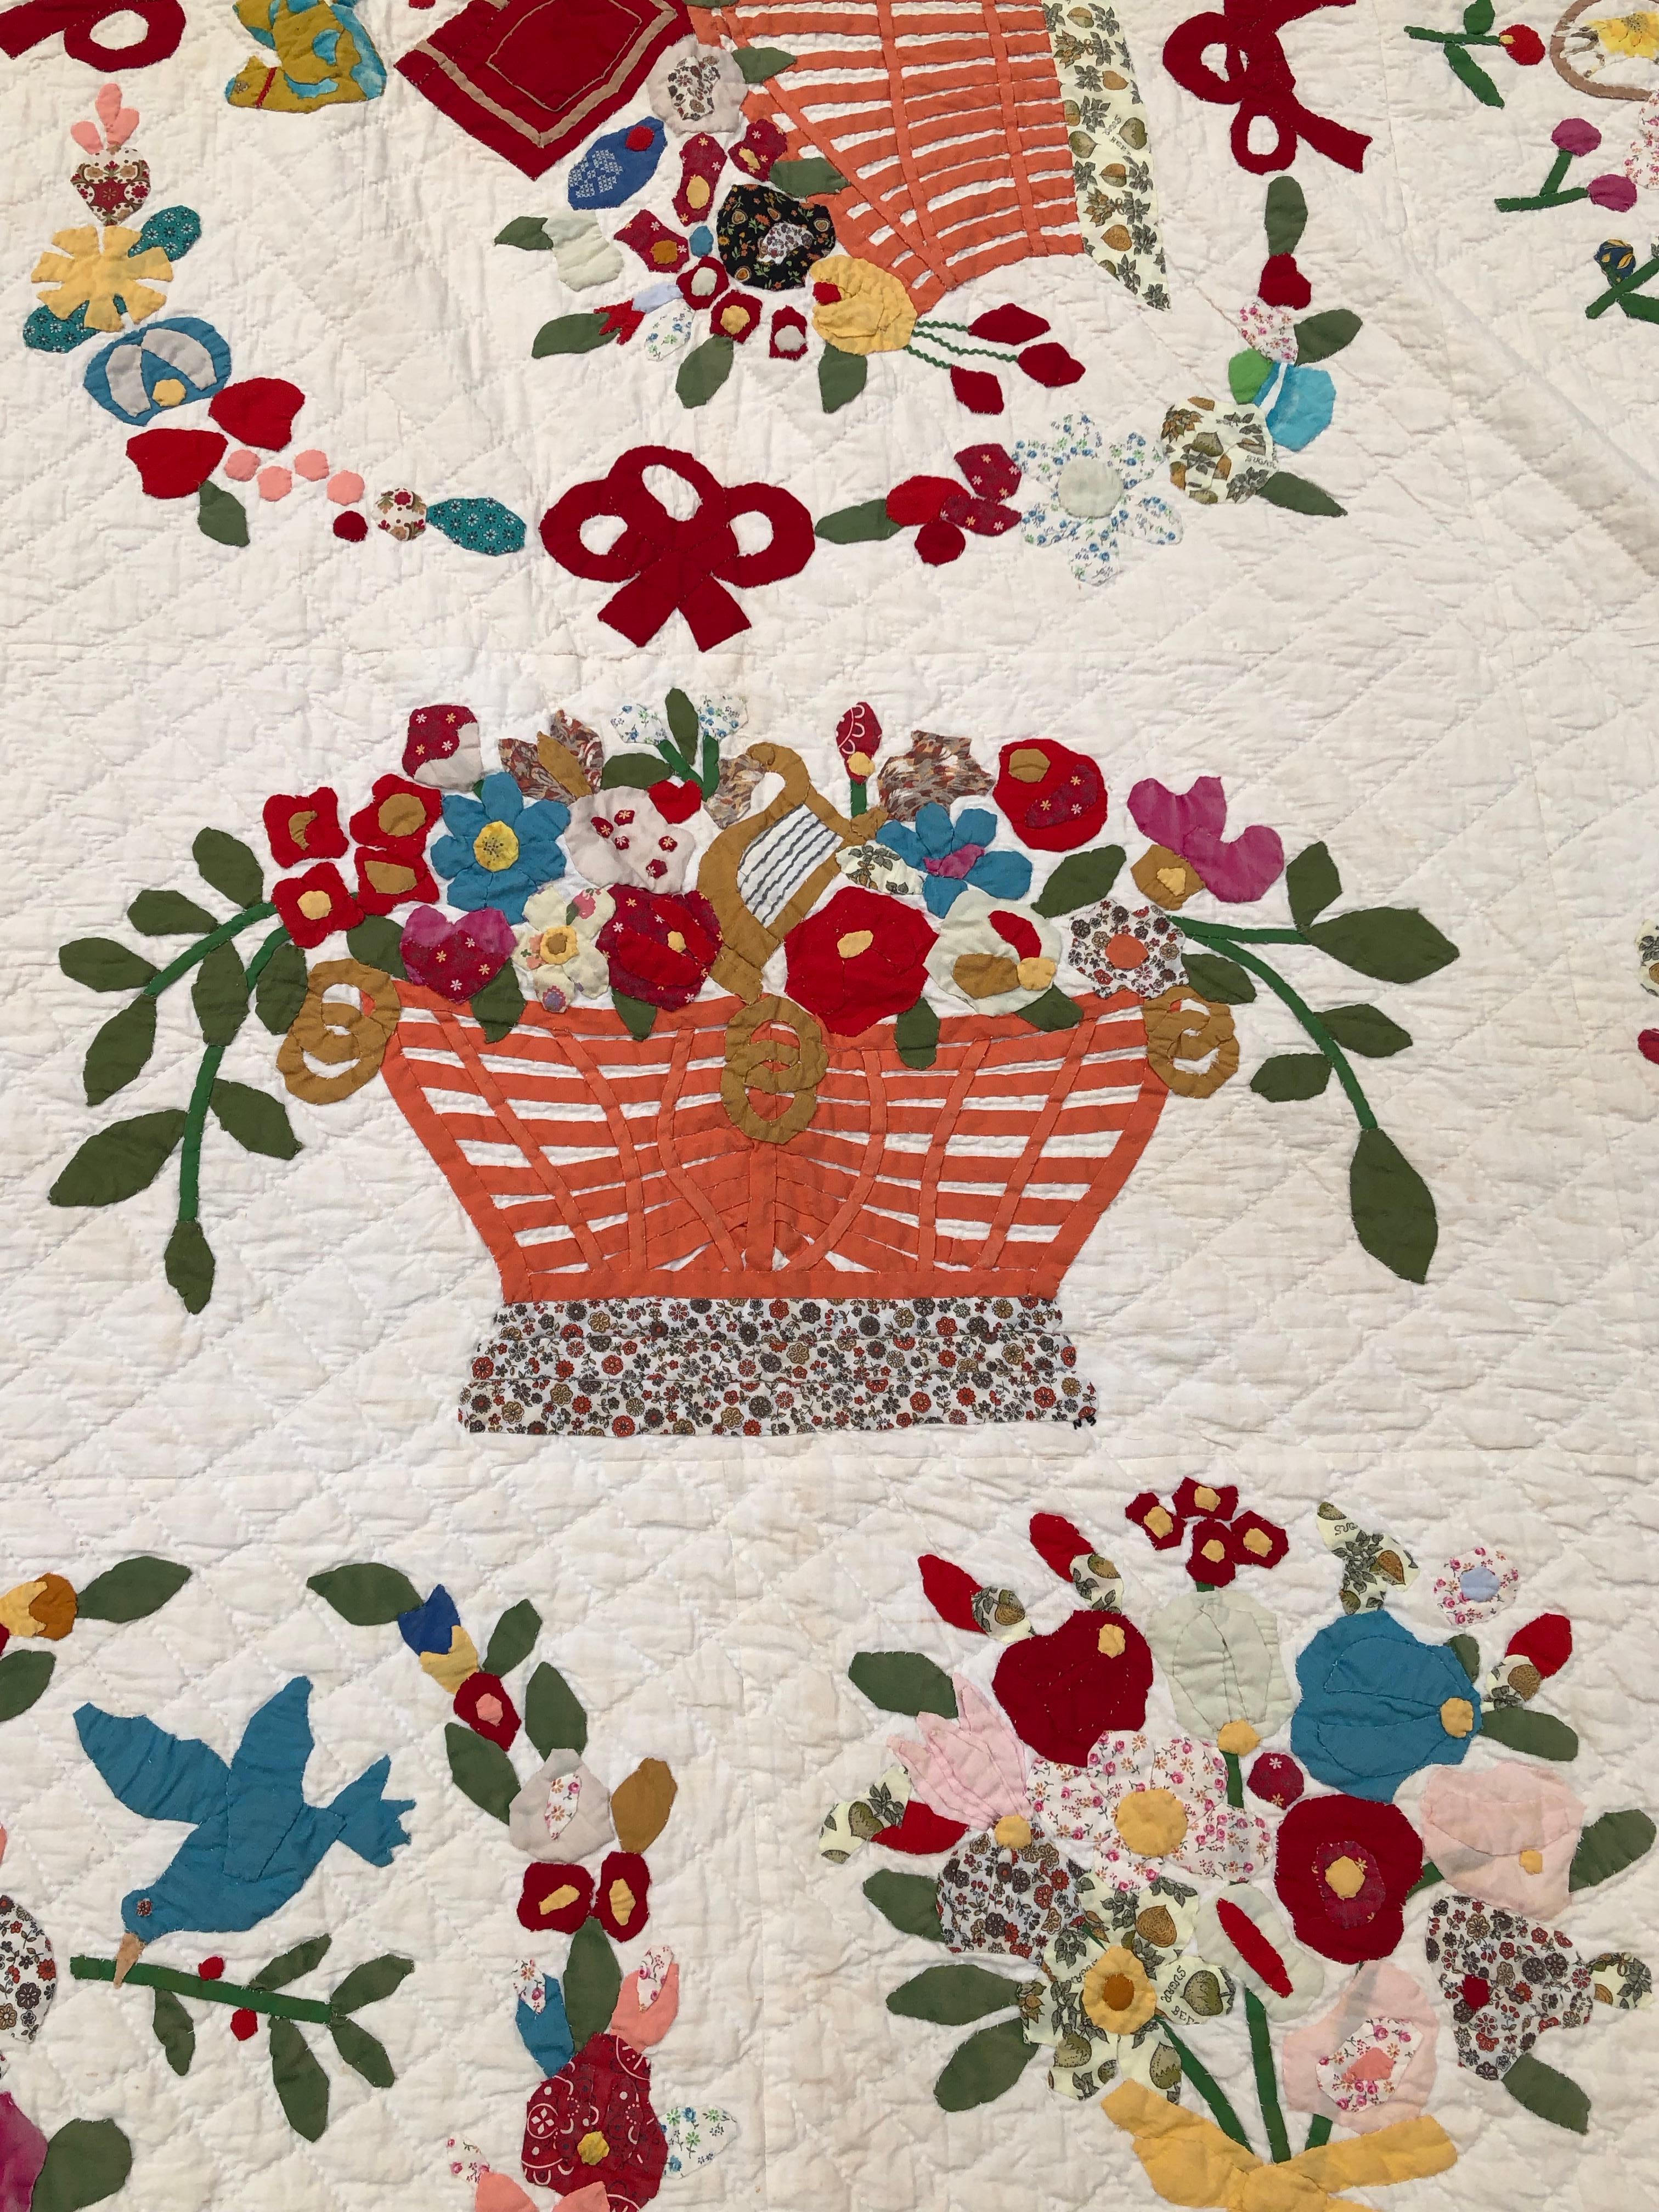 Cotton Baltimore Album Quilt 29 Blocks Nine Birds and Open Baskets Signed Armstrong For Sale